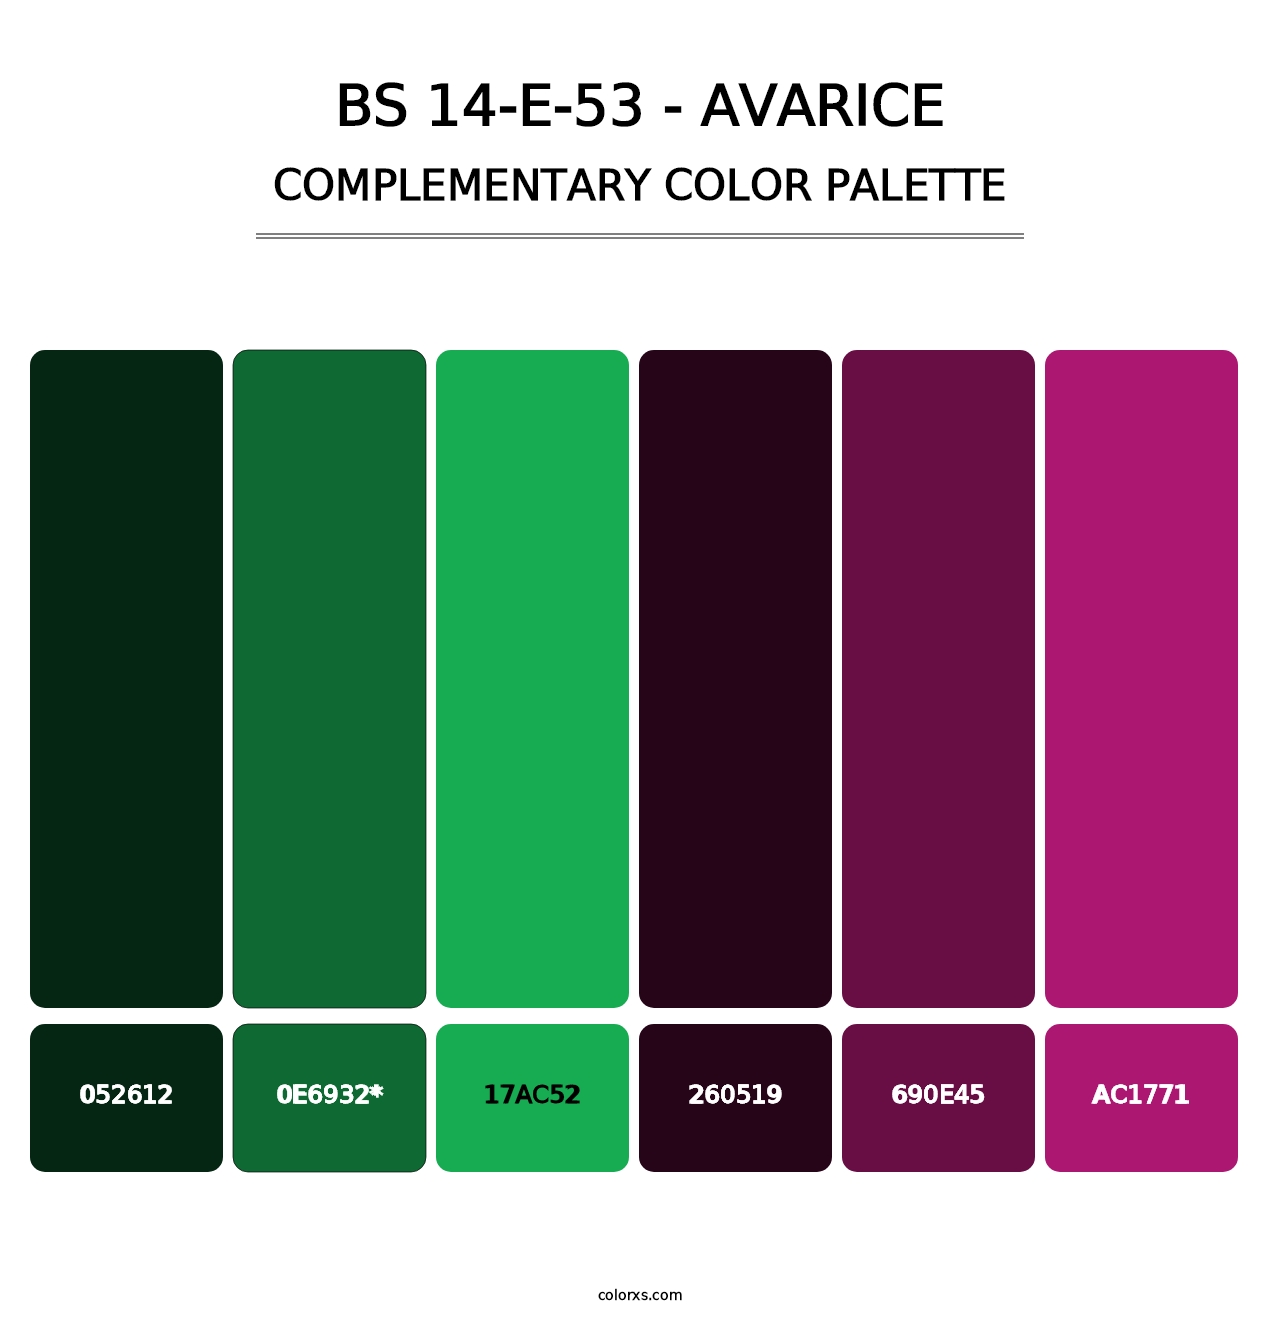 BS 14-E-53 - Avarice - Complementary Color Palette